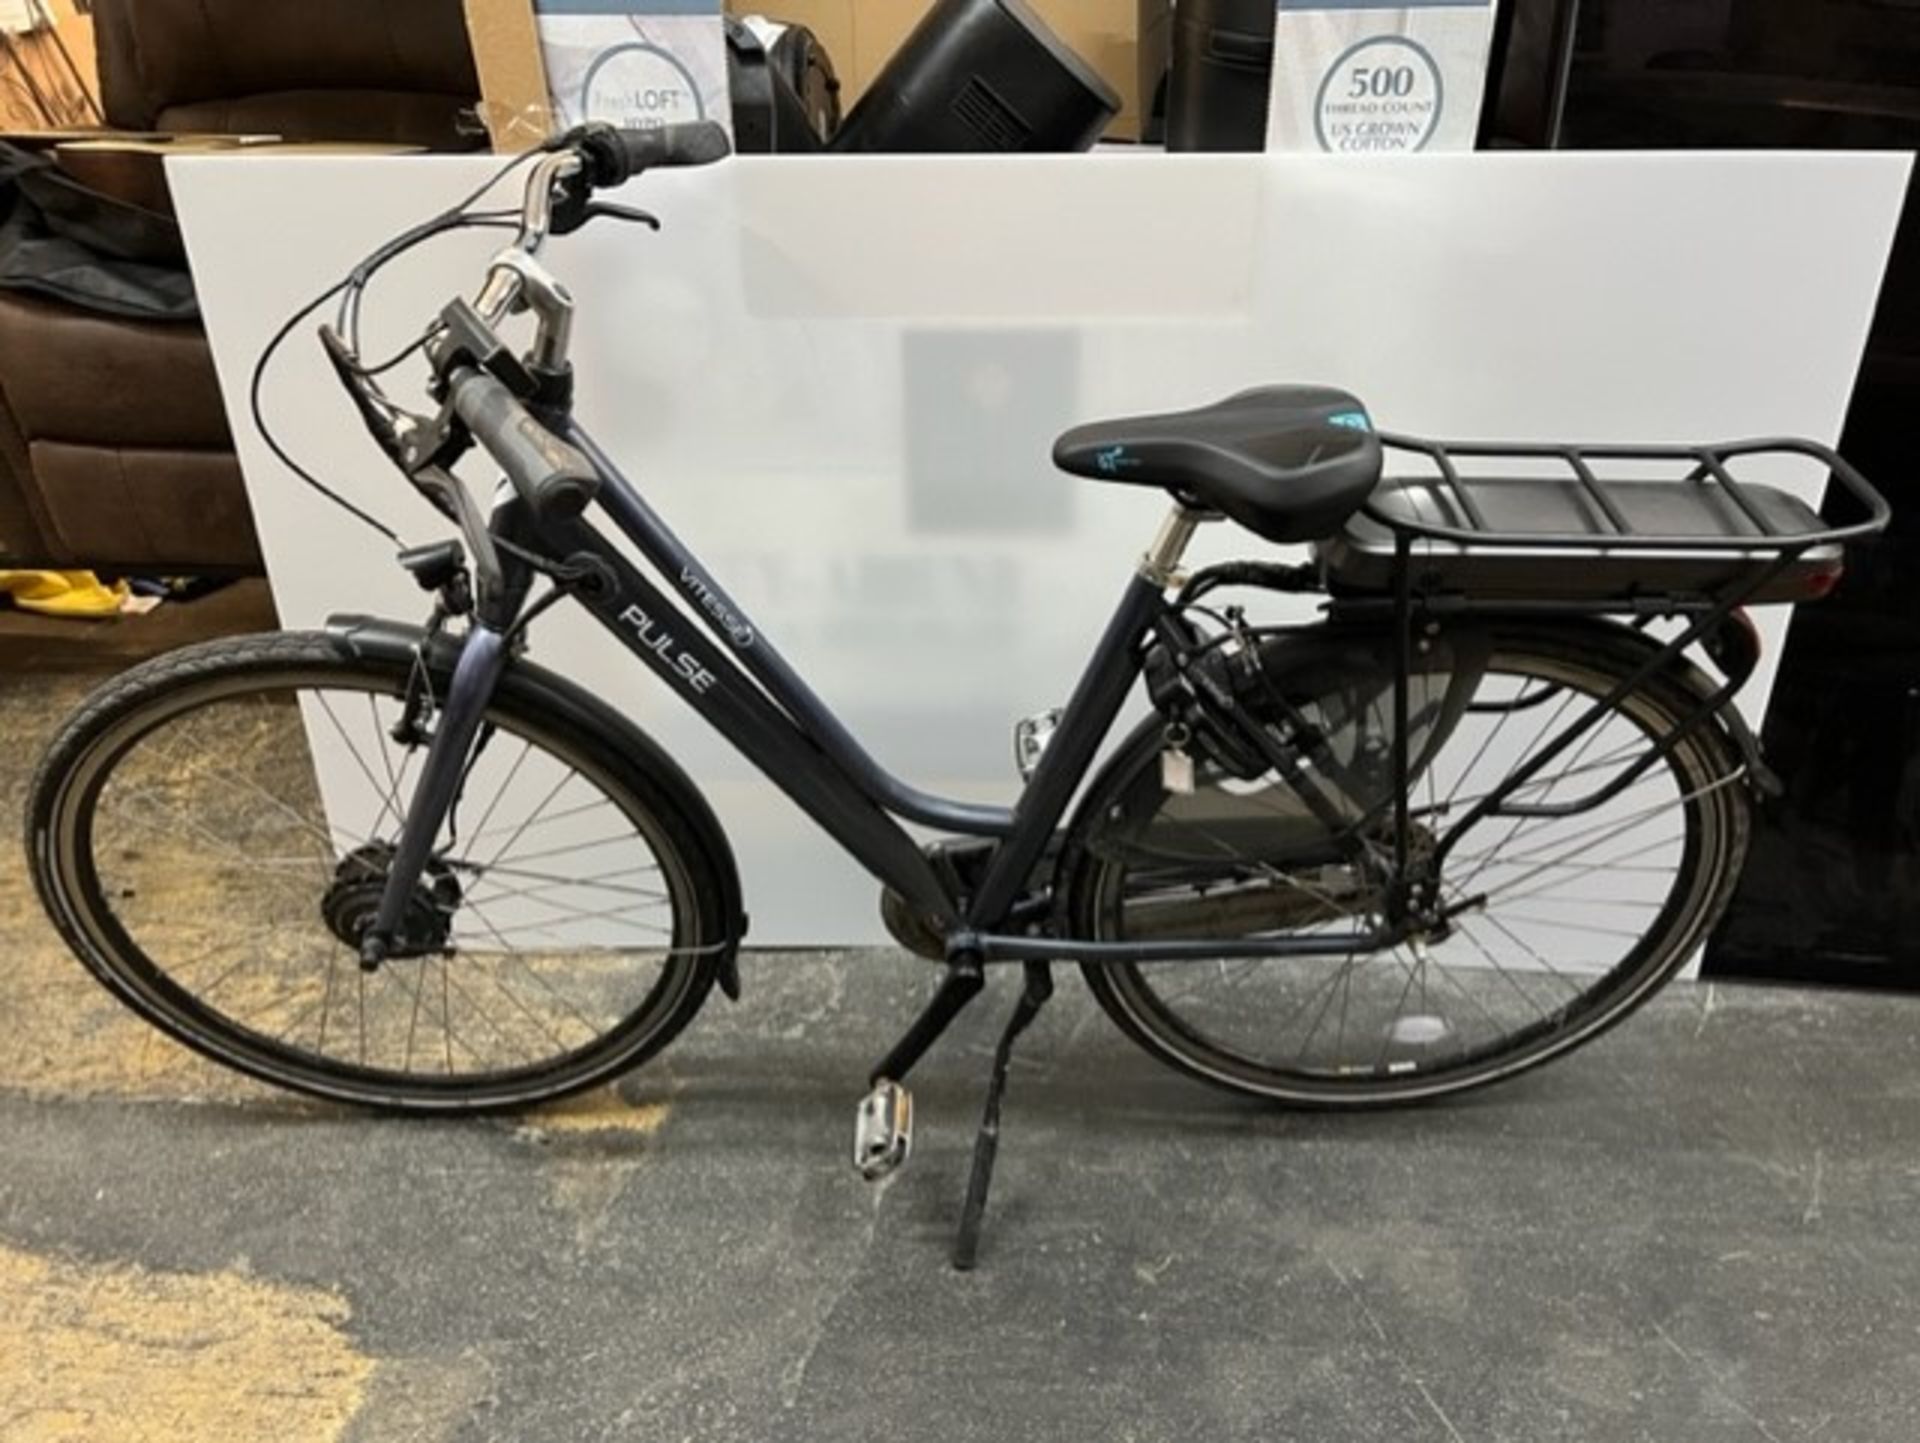 1 VITESSE PULSE LADIES HYBRID E-BIKE WITH BATTERY RRP Â£1299 (NO CHARGER, PICTURES FOR